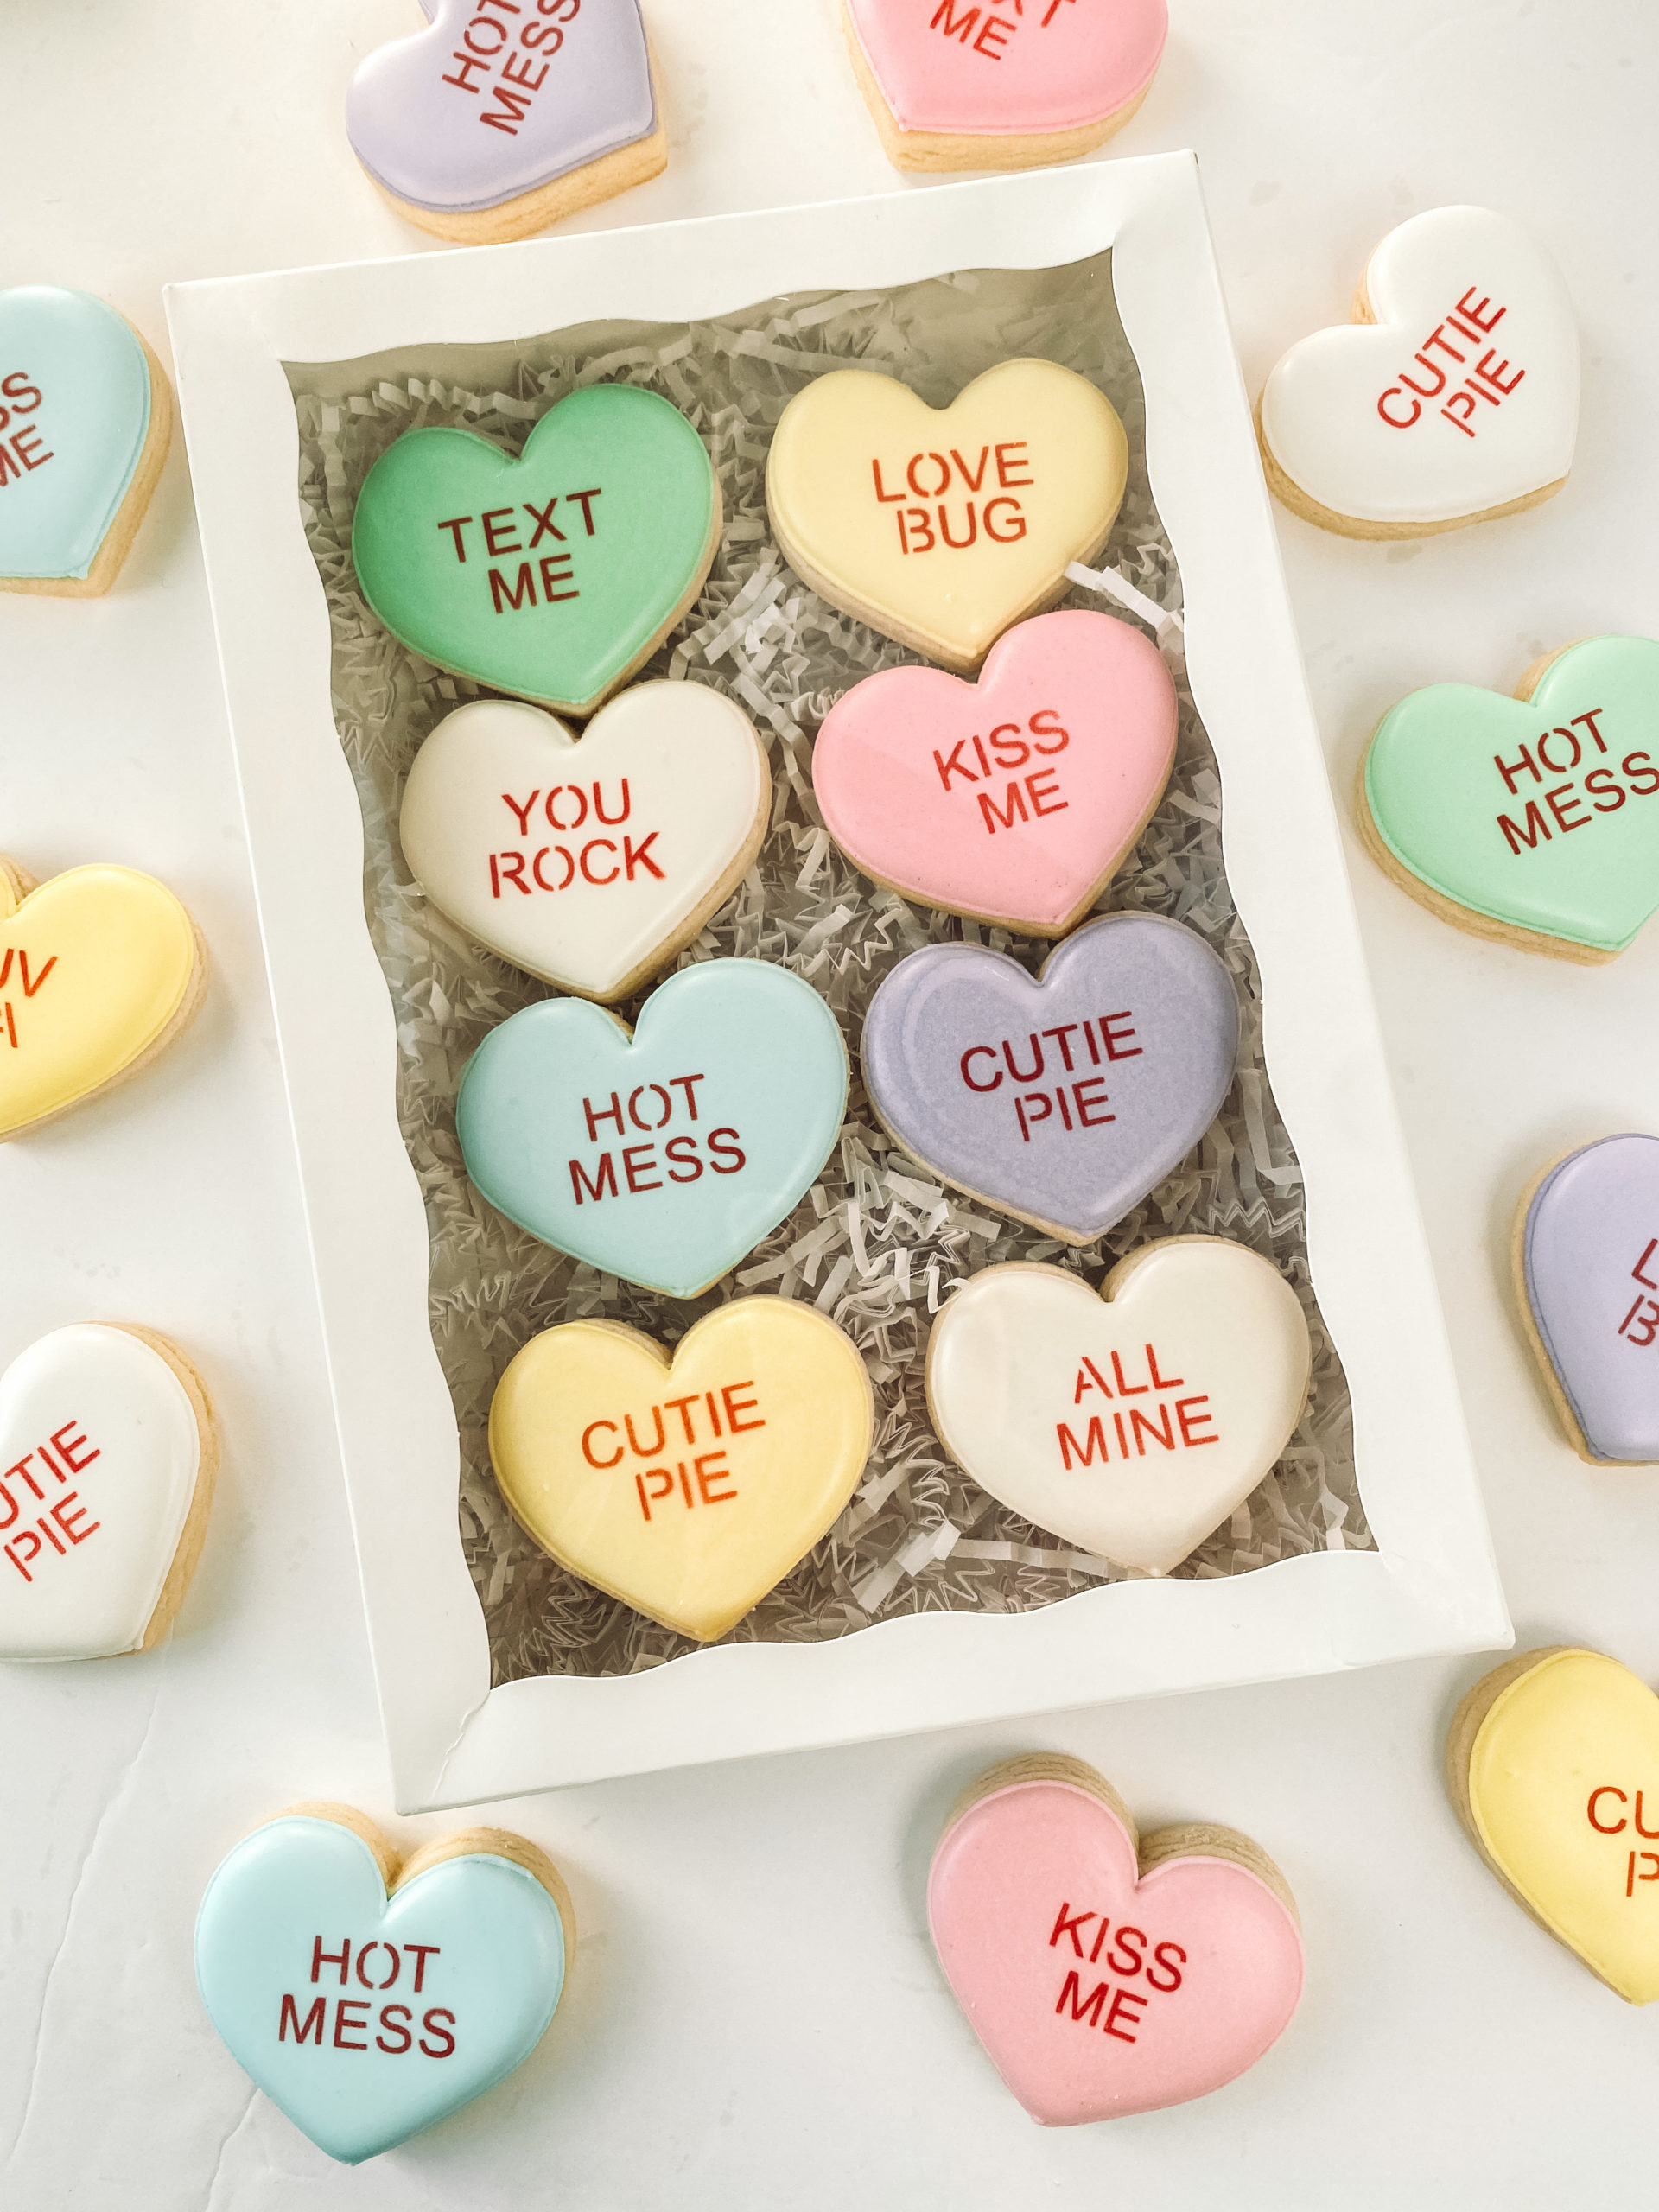 How To Make Valentine's Conversation Heart Cookies - Summer's Sweet Shoppe